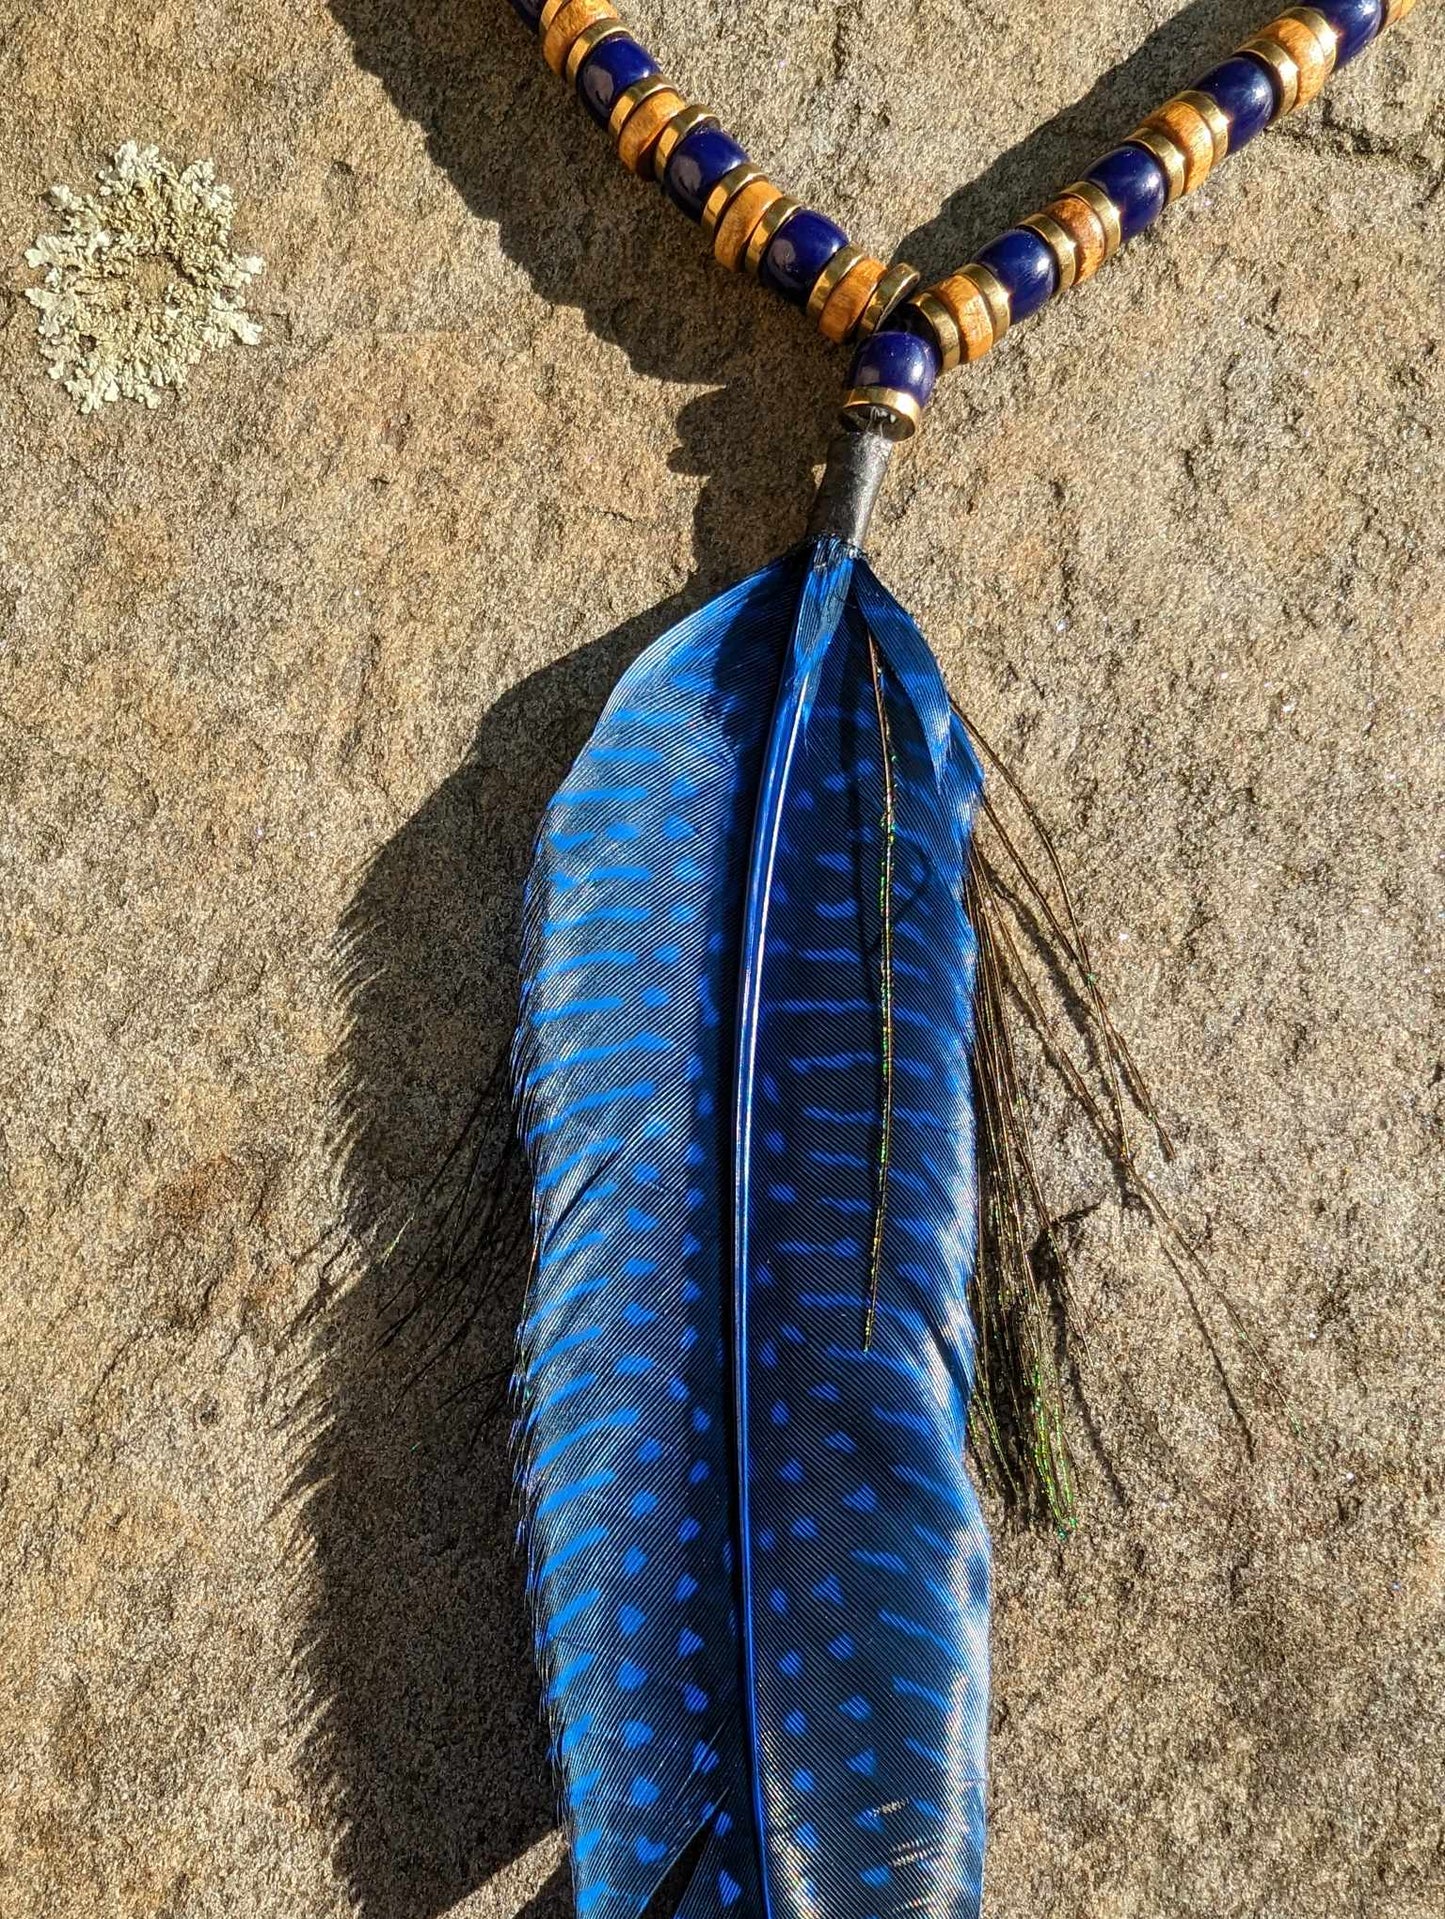 Wood Cobalt Blue Glass and Metal Beaded Peacock Feather Necklace